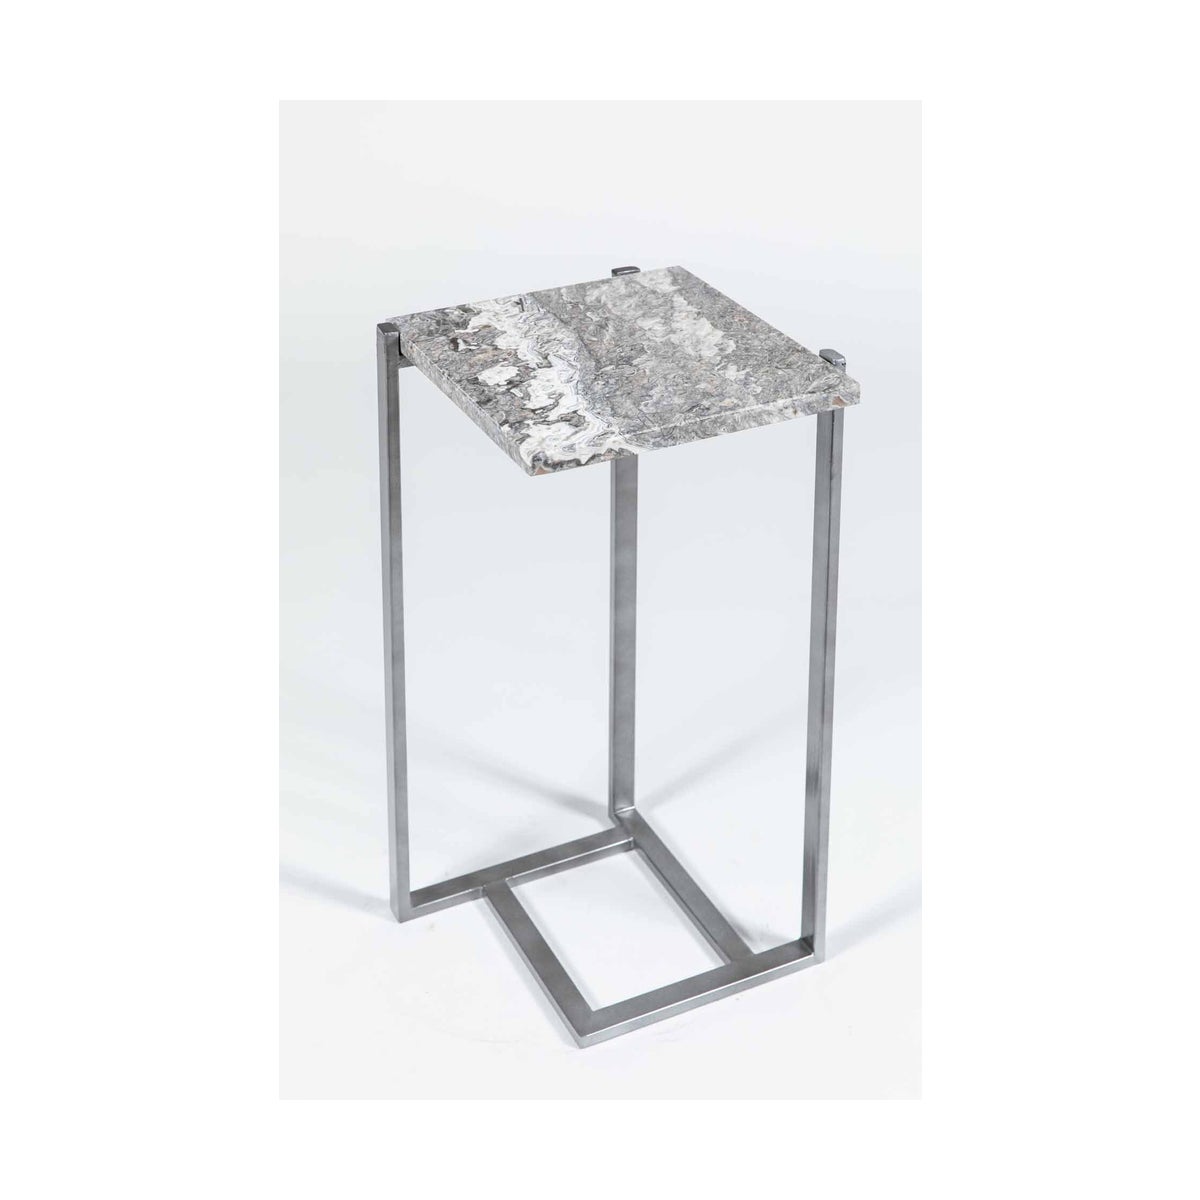 Russell Accent Table in Antique Silver w/ Zebra Onyx Top